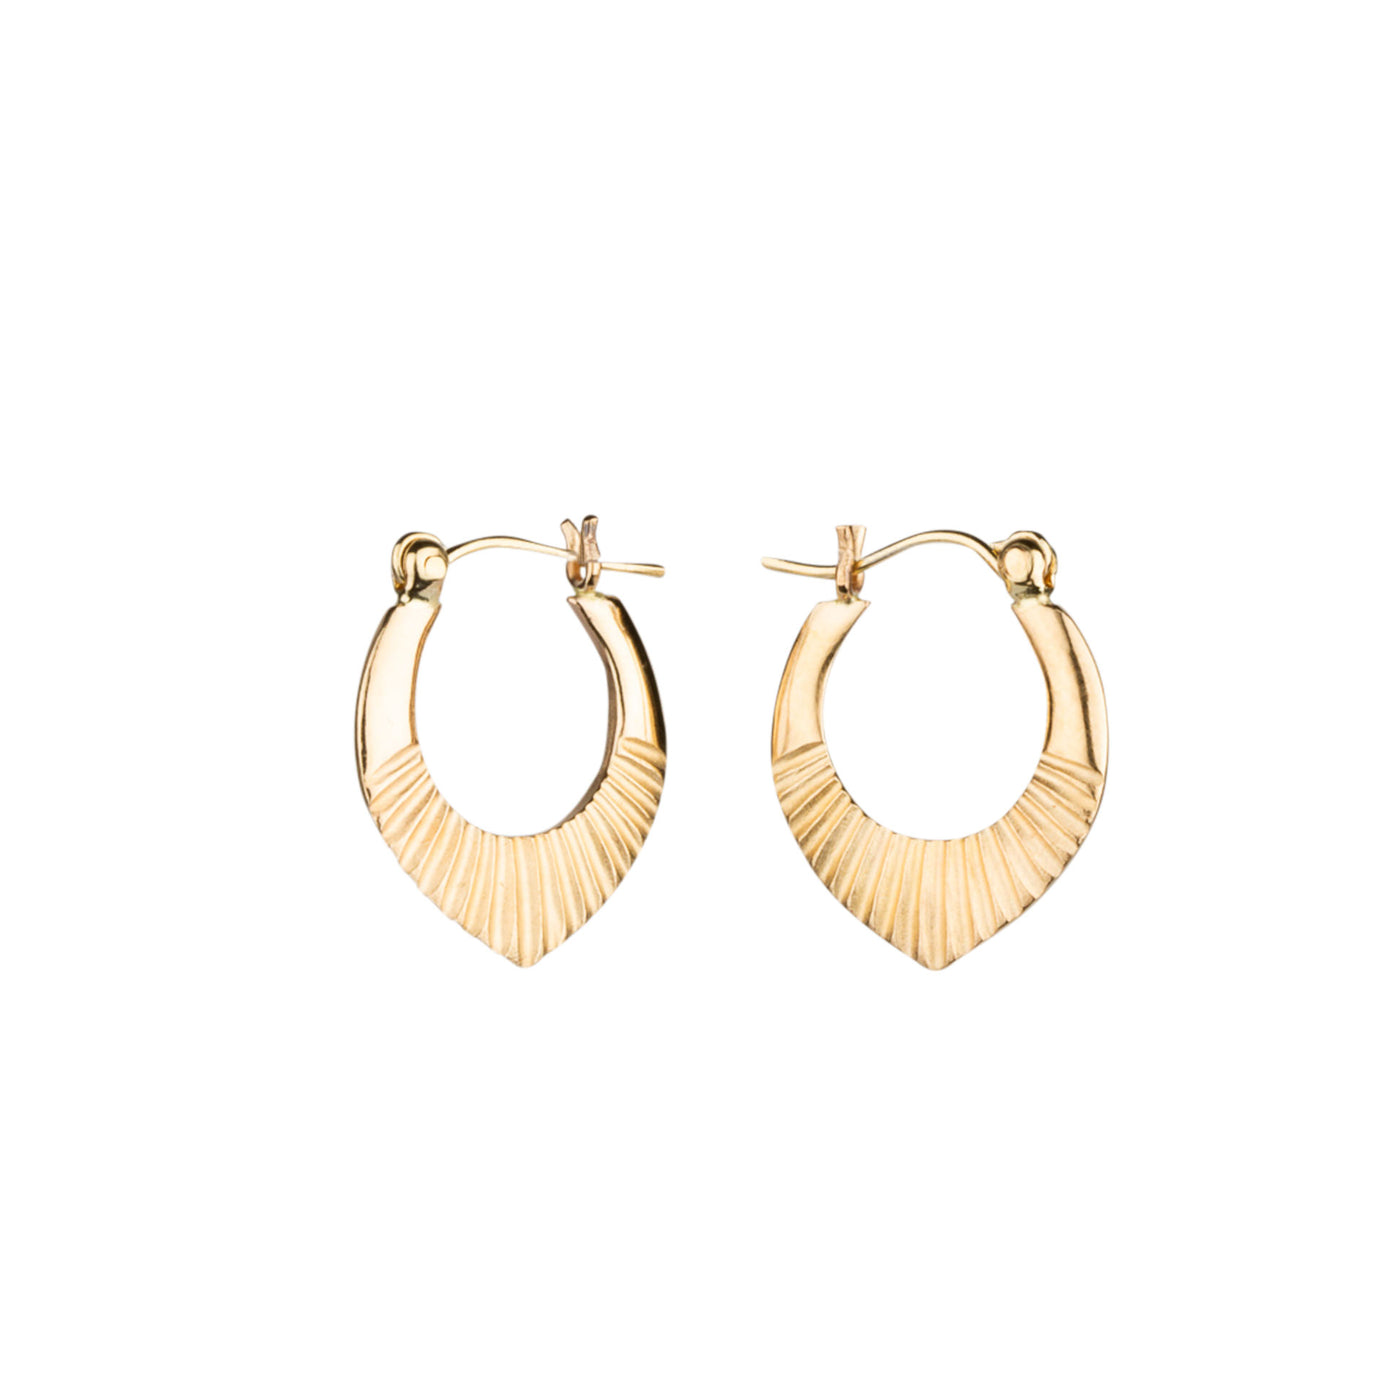 14k yellow gold hinged hoop earrings with carved sunburst motif